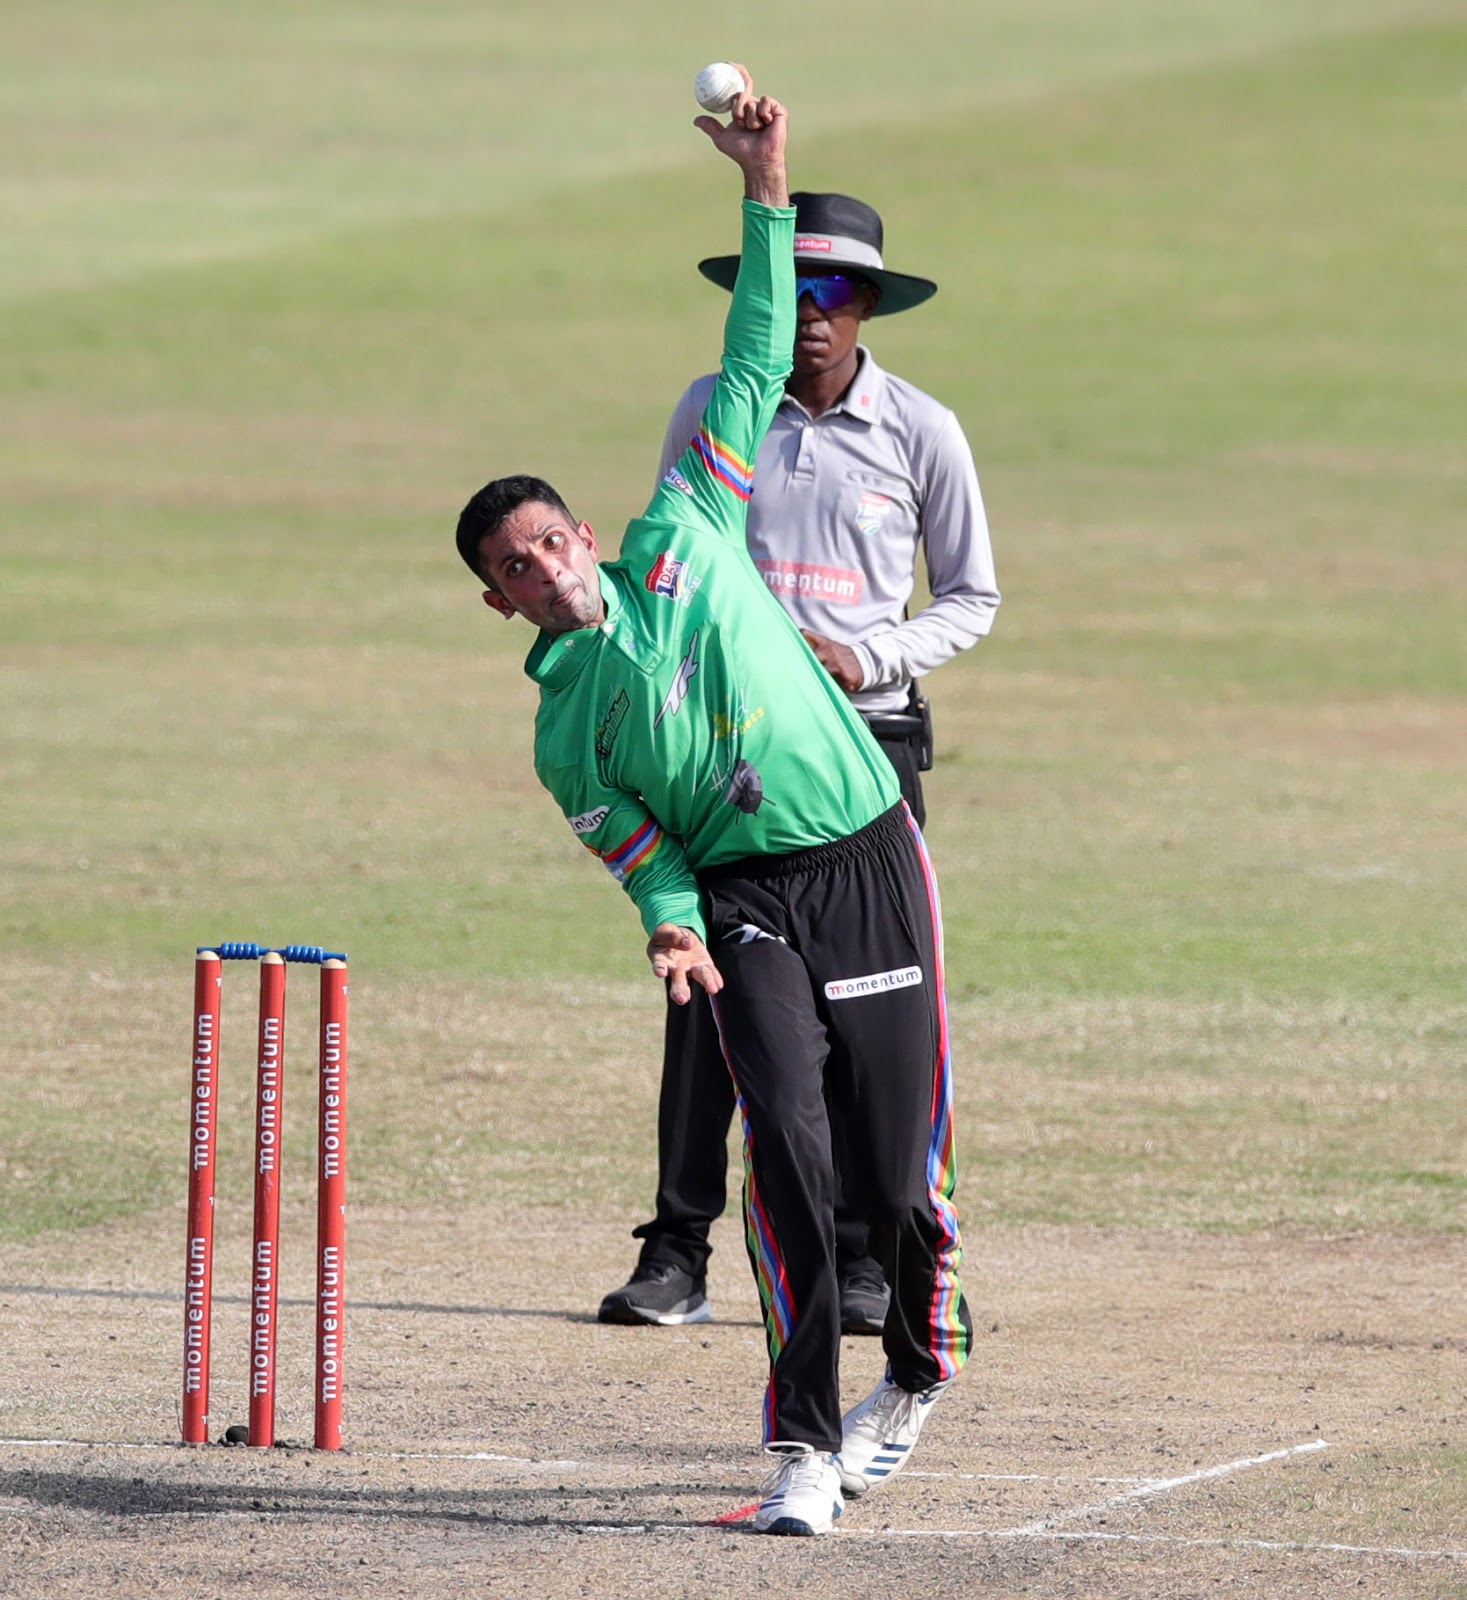 Keshav Maharaj delivers for the Hollywoodbets Dolphins